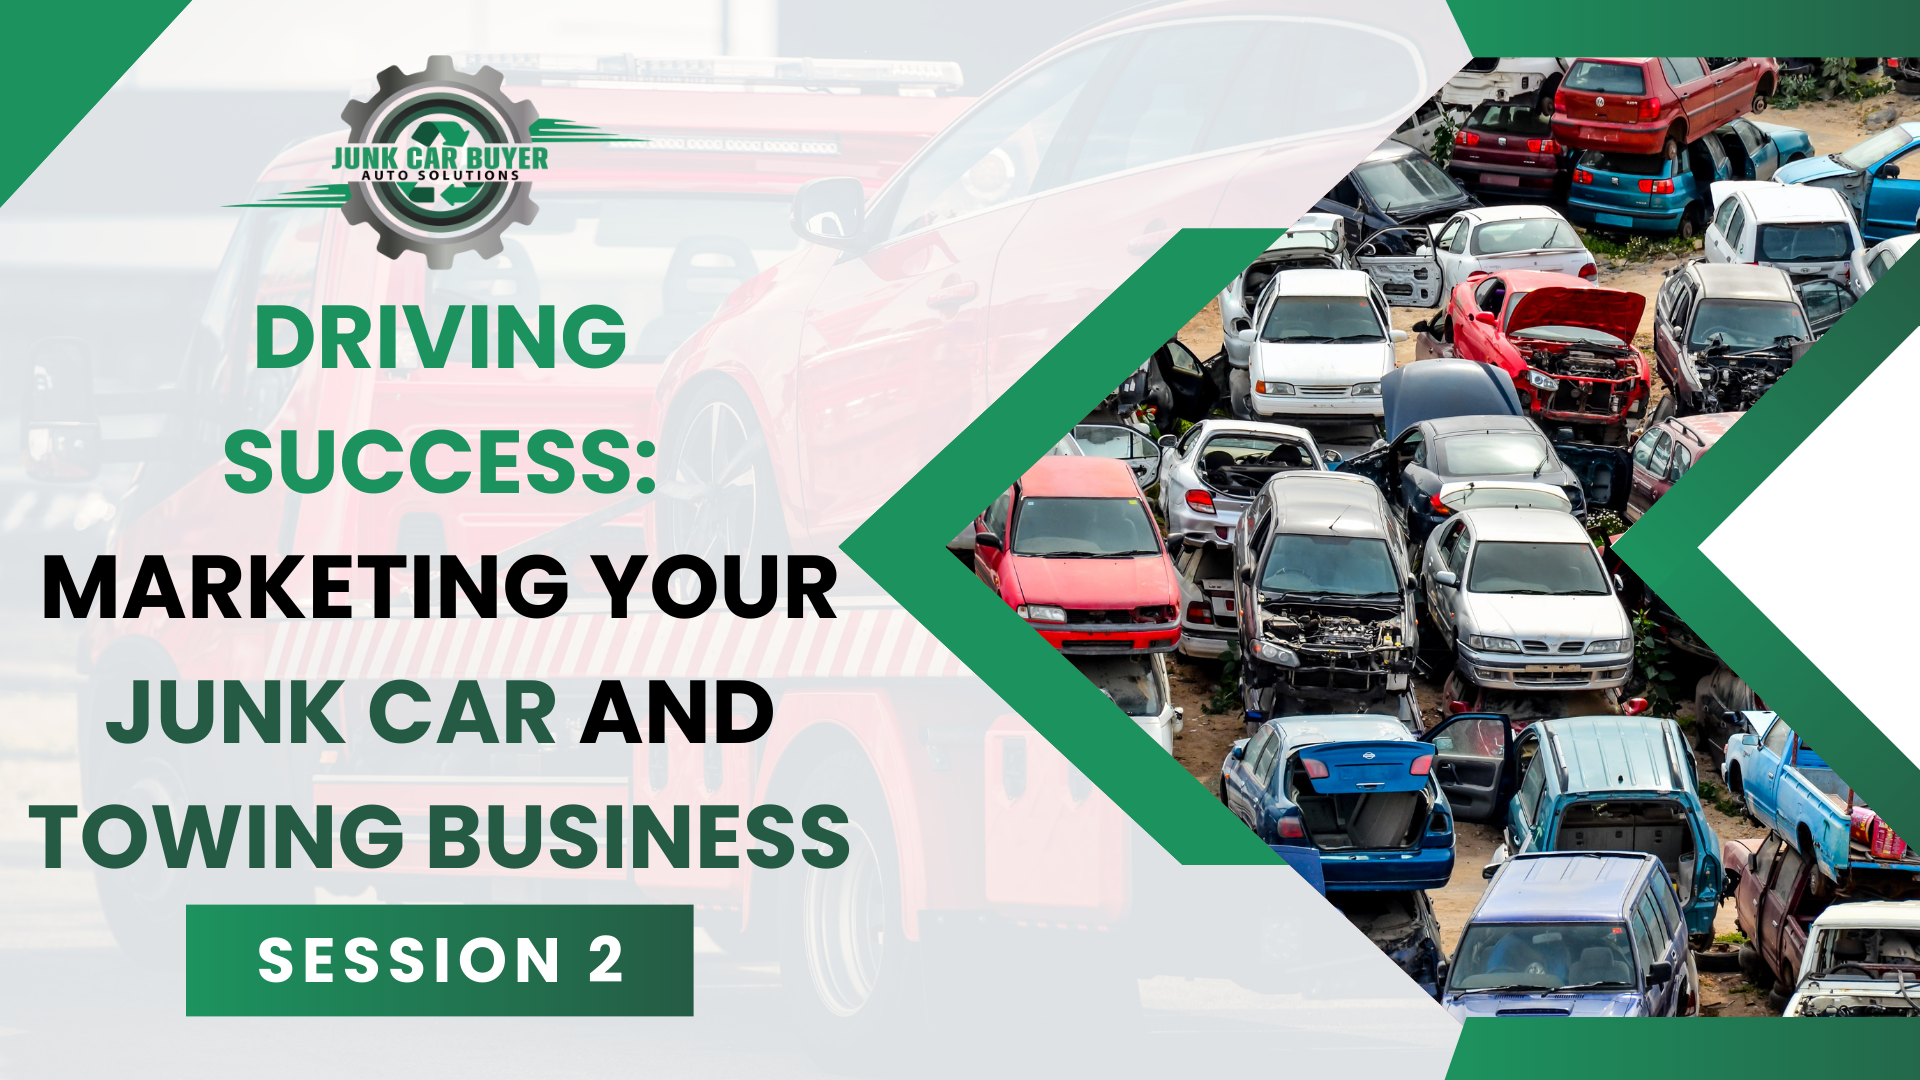 DRIVING SUCCESS: MARKETING YOUR JUNK CAR AND TOWING BUSINESS